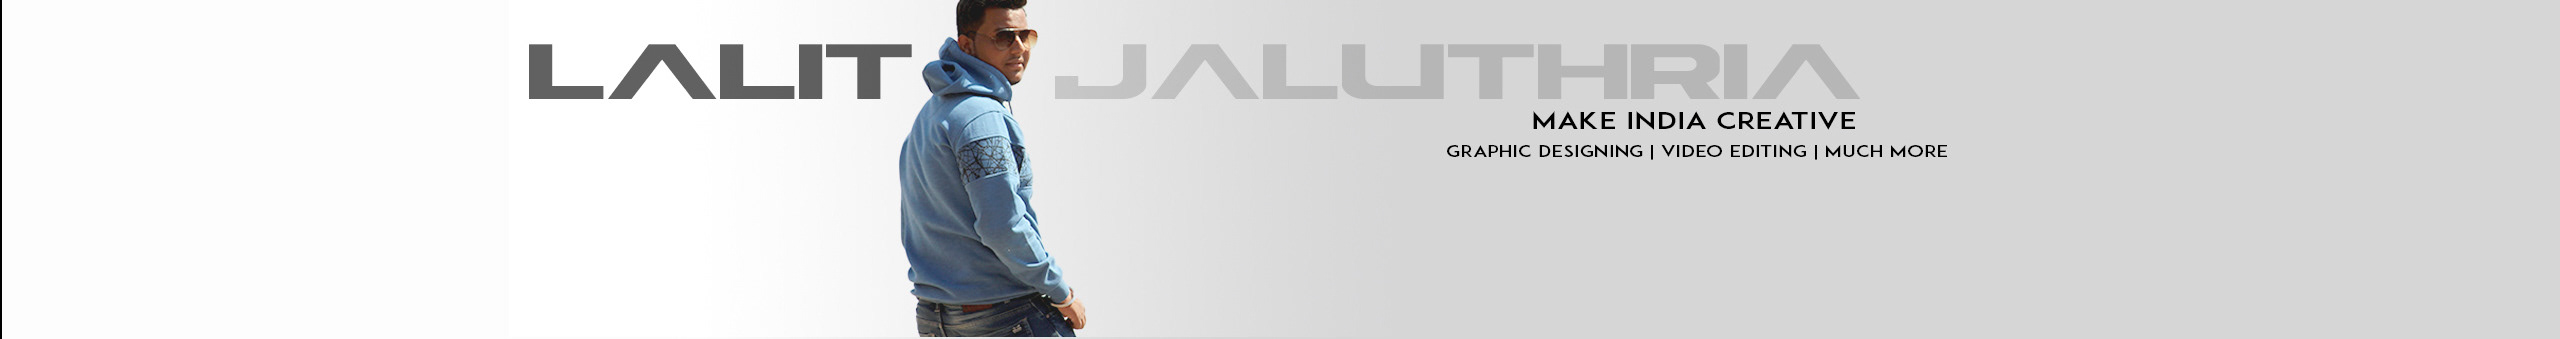 Lalit Jaluthria's profile banner